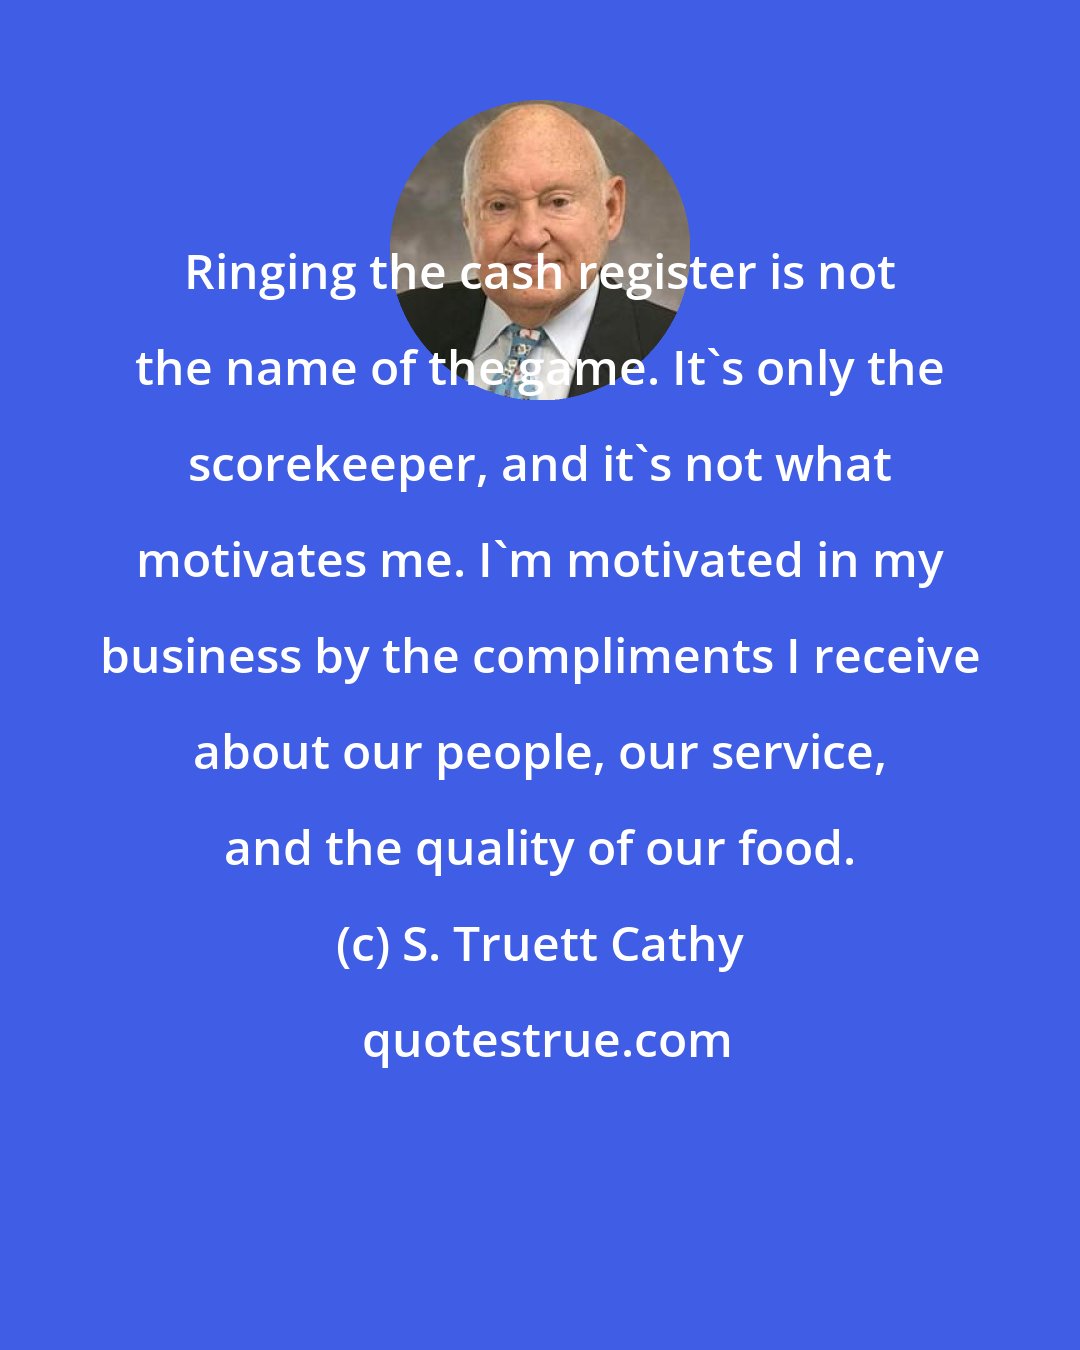 S. Truett Cathy: Ringing the cash register is not the name of the game. It's only the scorekeeper, and it's not what motivates me. I'm motivated in my business by the compliments I receive about our people, our service, and the quality of our food.